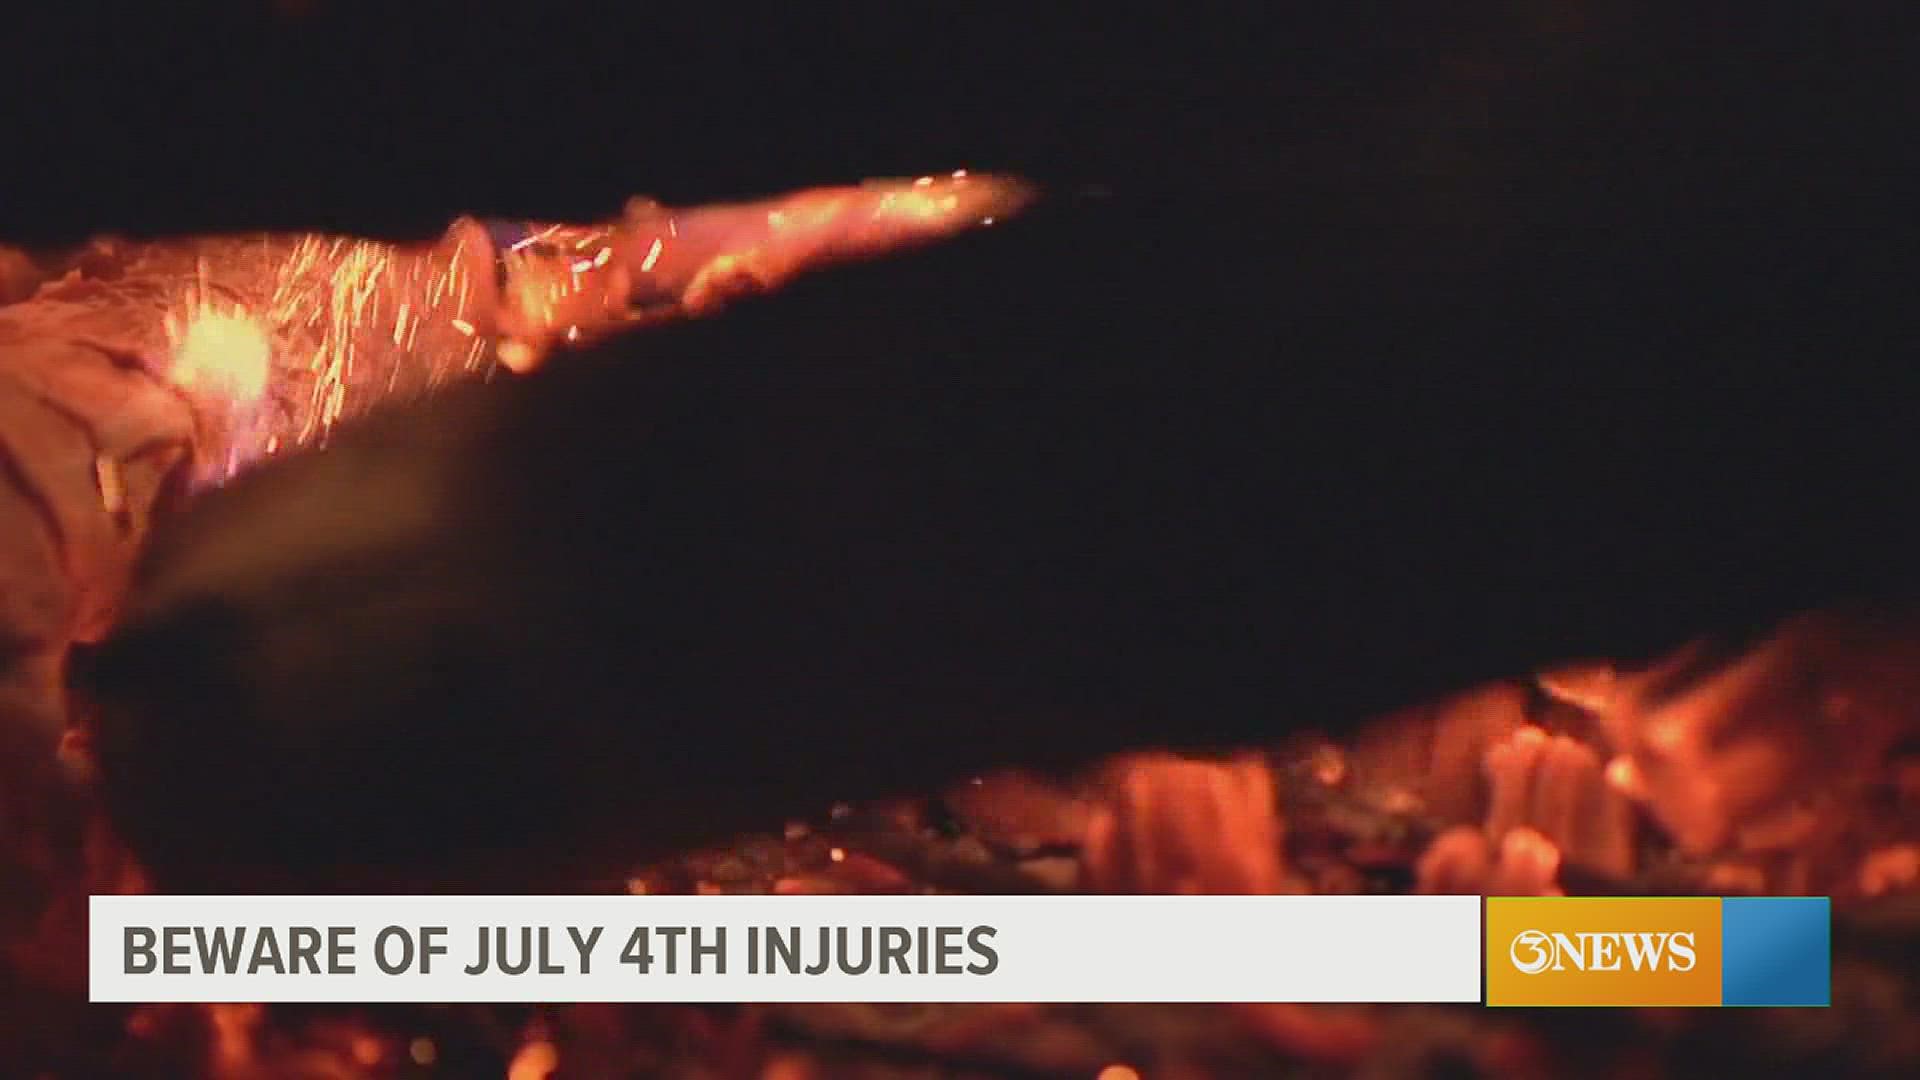 66 percent of firework injuries occur on July Fourth, research shows.